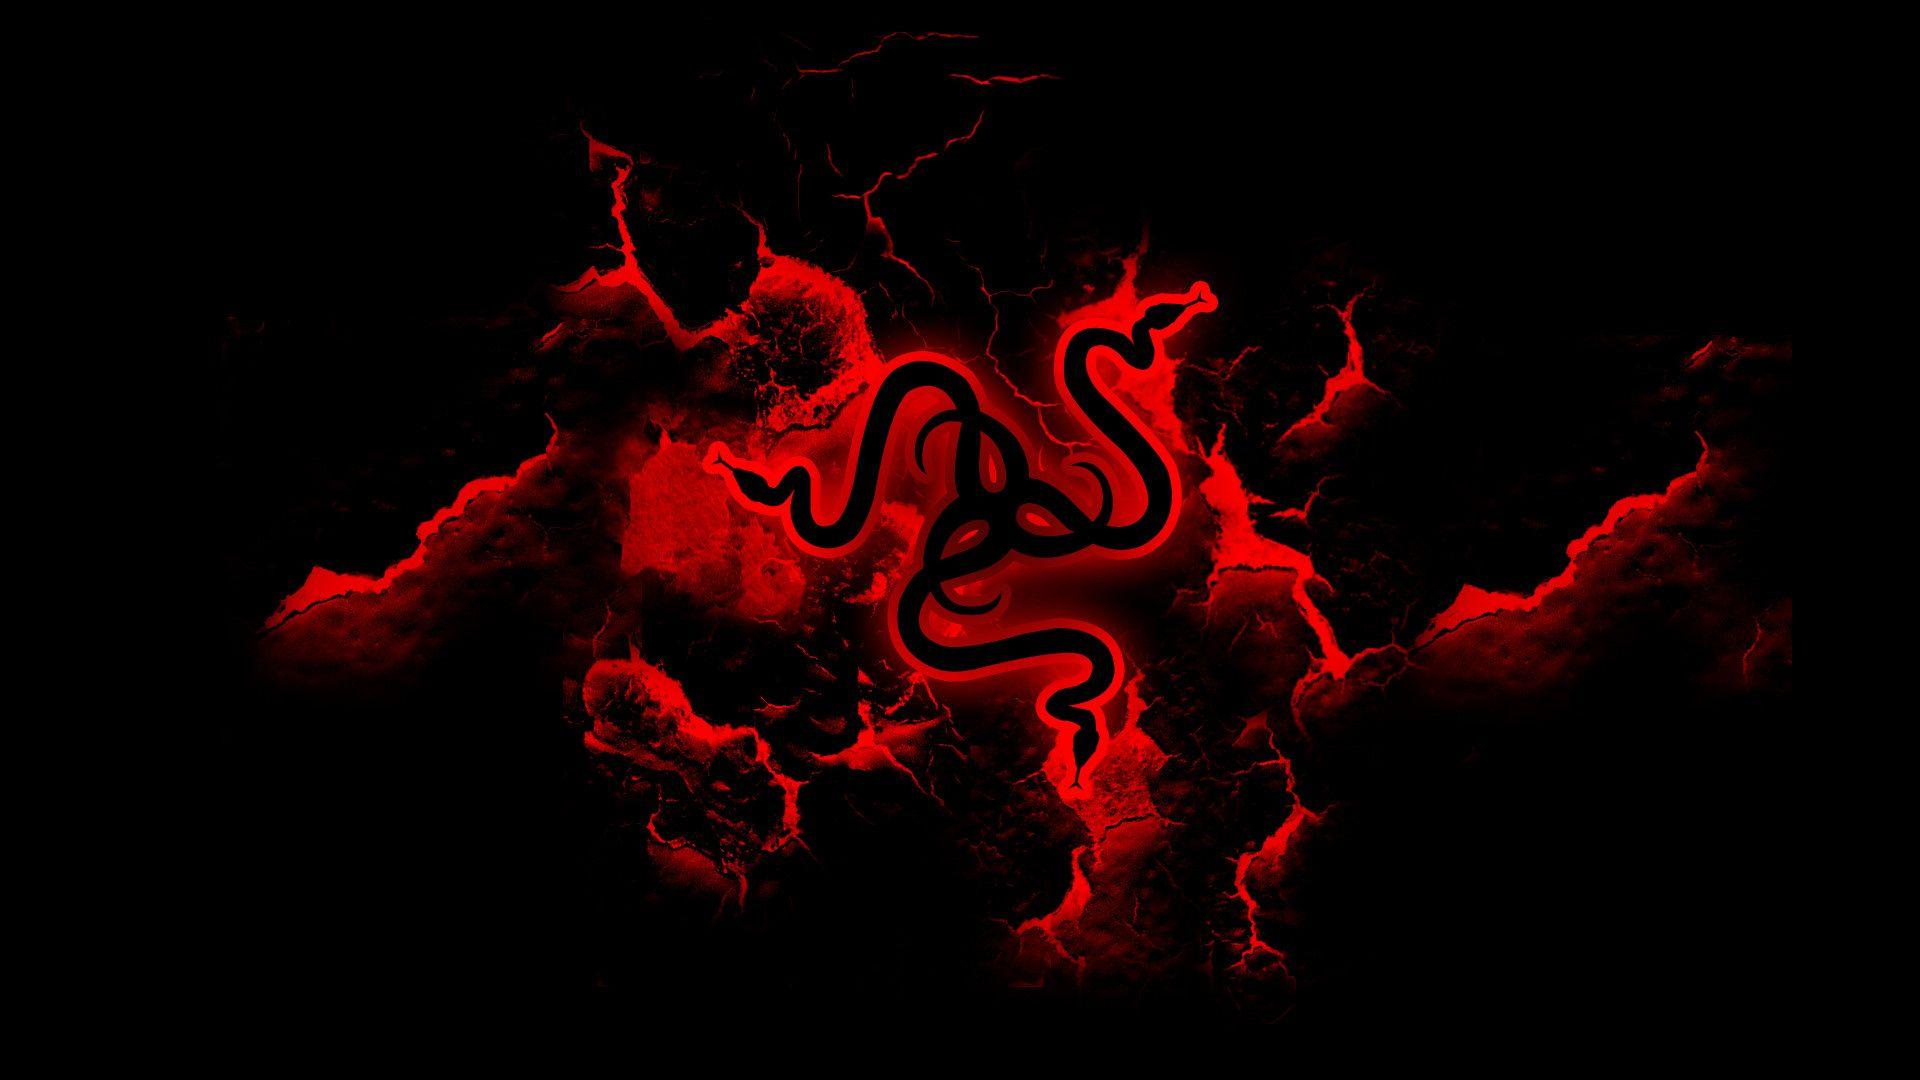 Red Razer Wallpapers HD